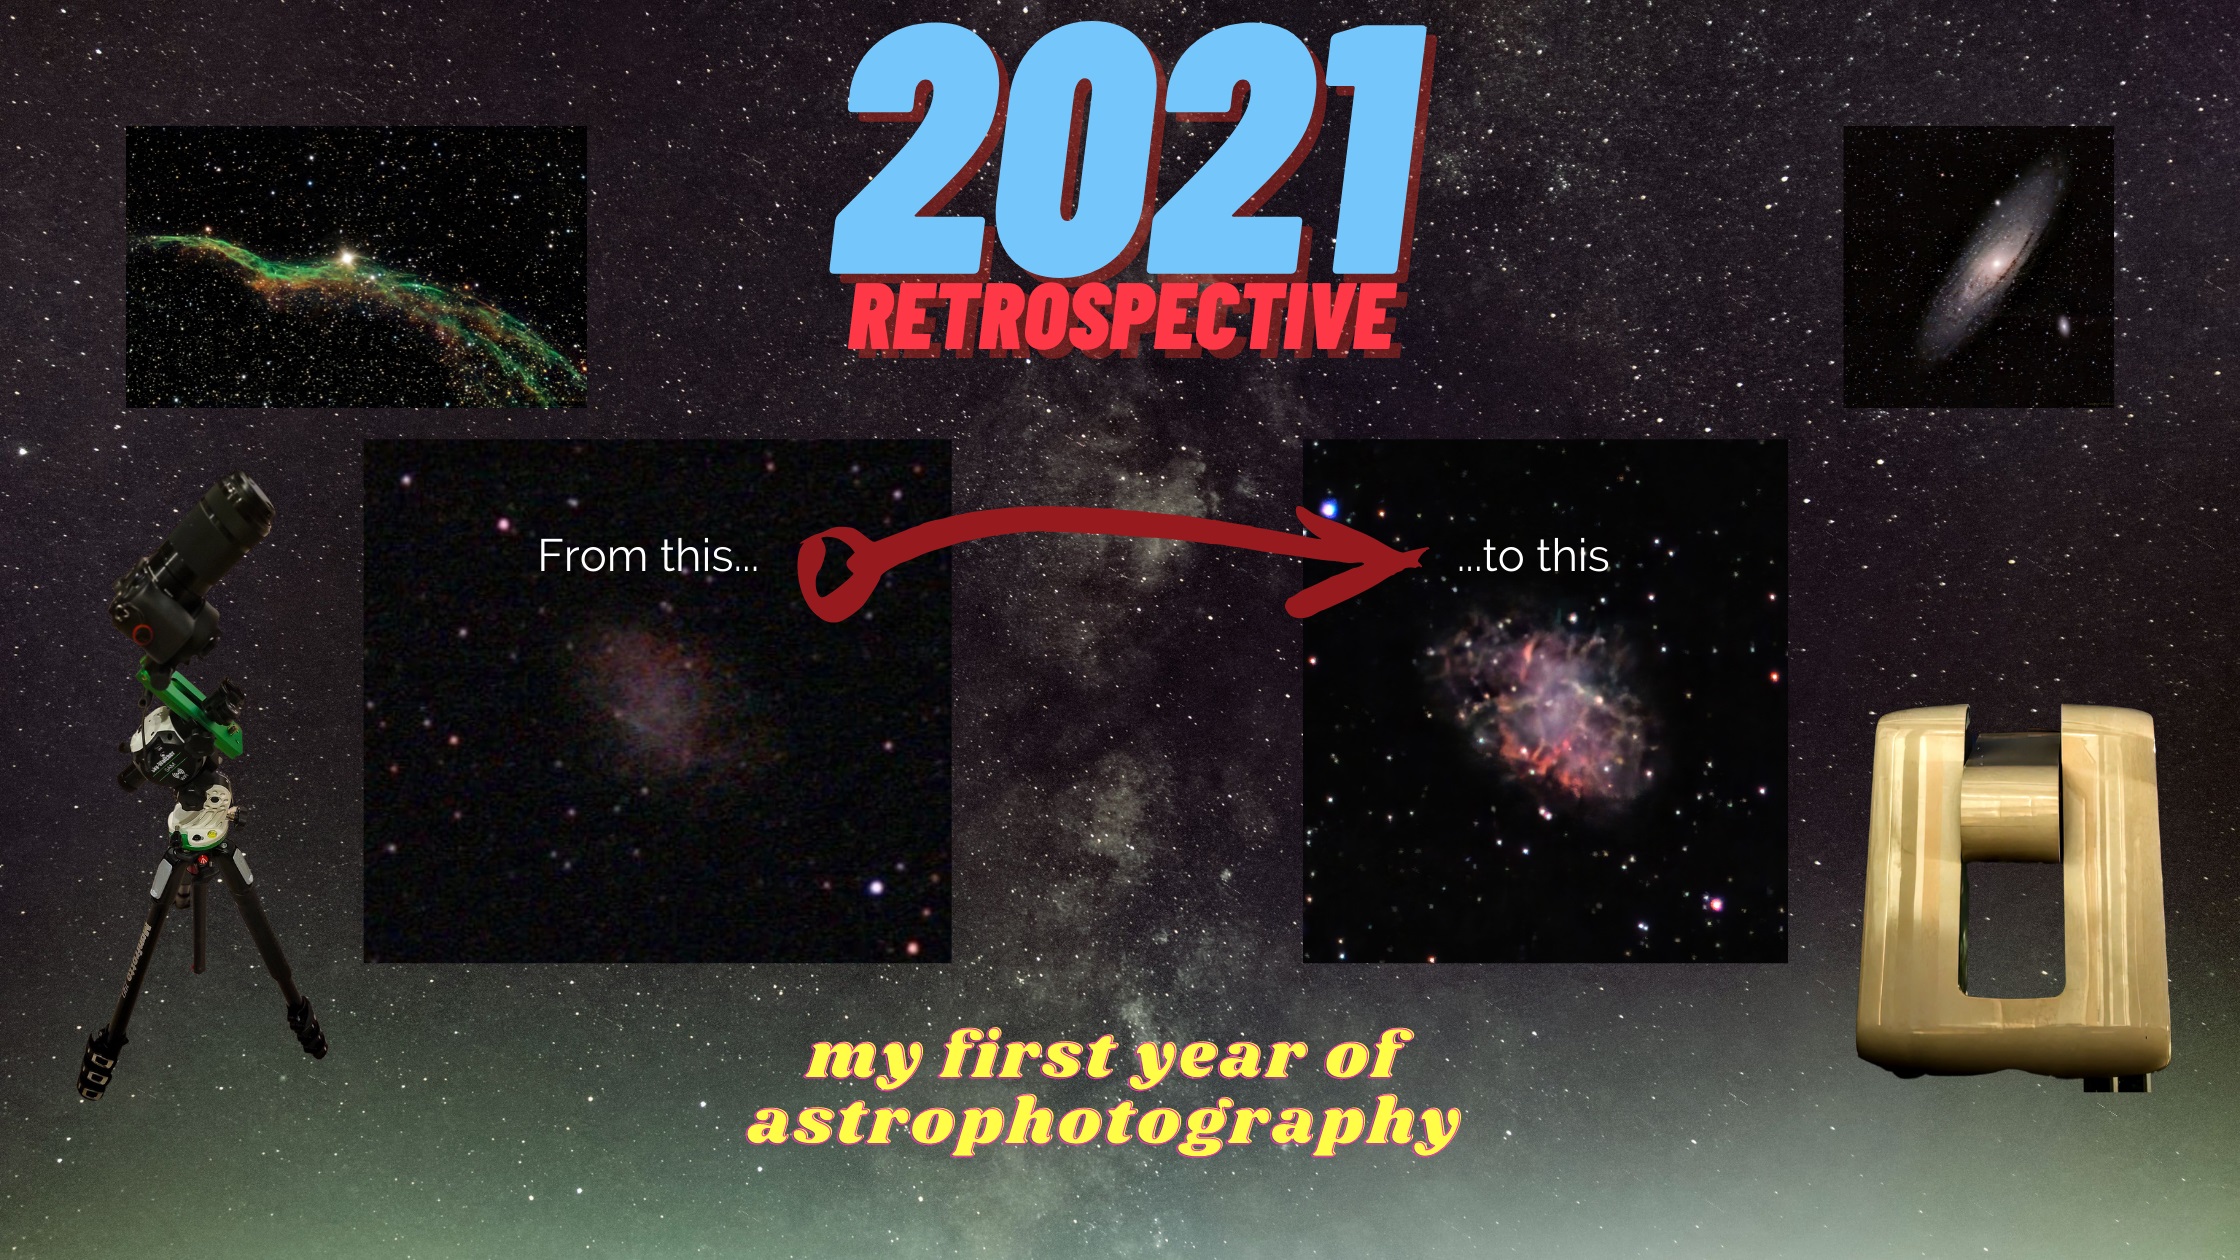 A look back at the first year of my astrophotography with my favorite photos from 2021.